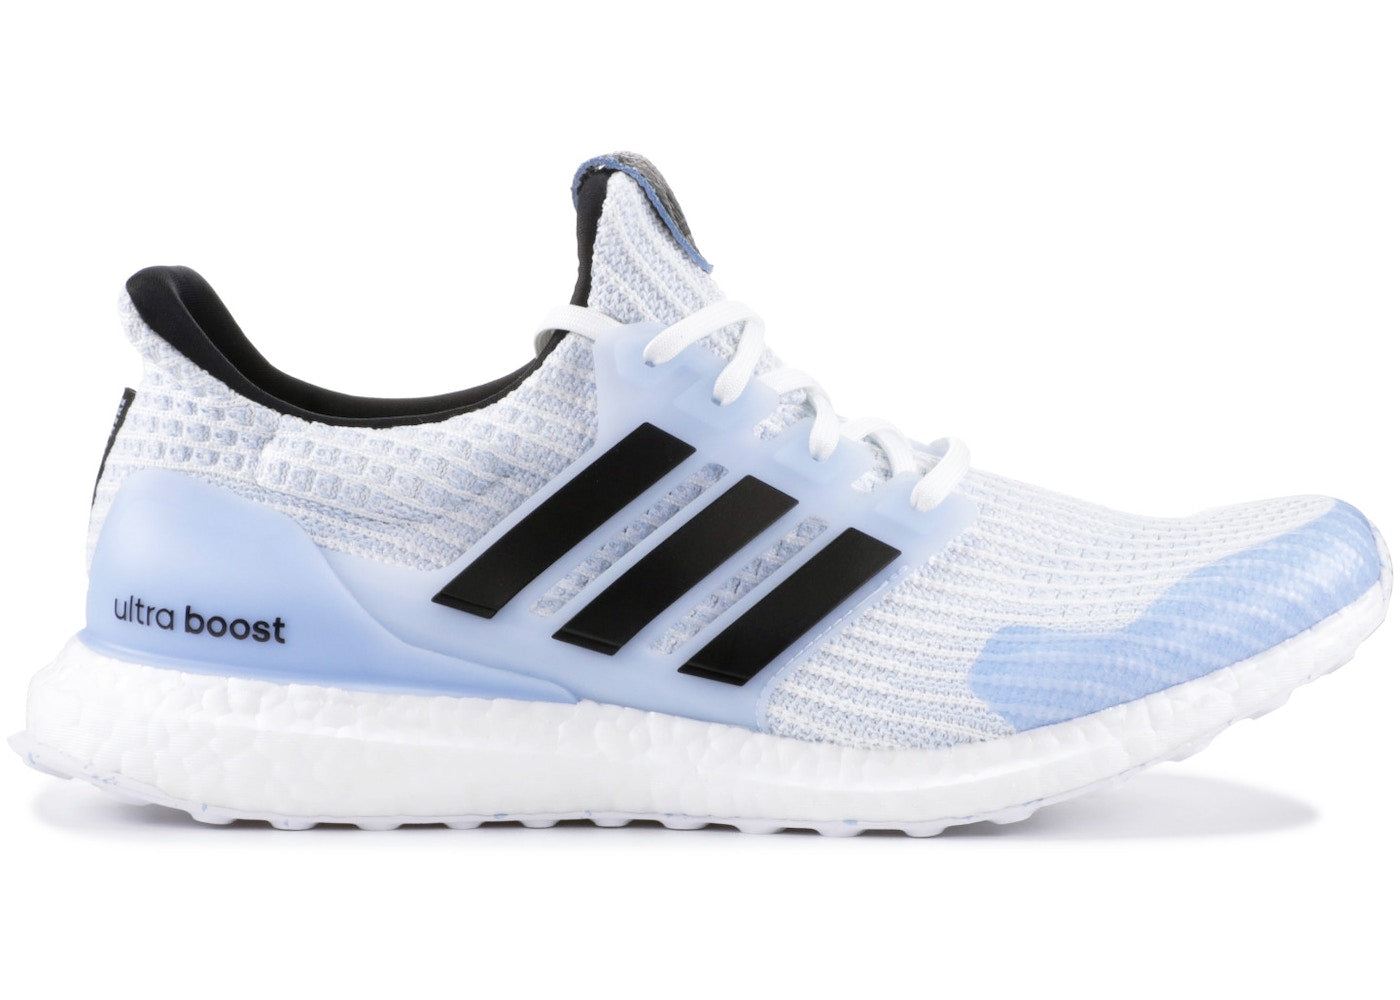 ADIDAS ULTRA BOOST 4.0 GAME OF THRONES WHITE WALKERS